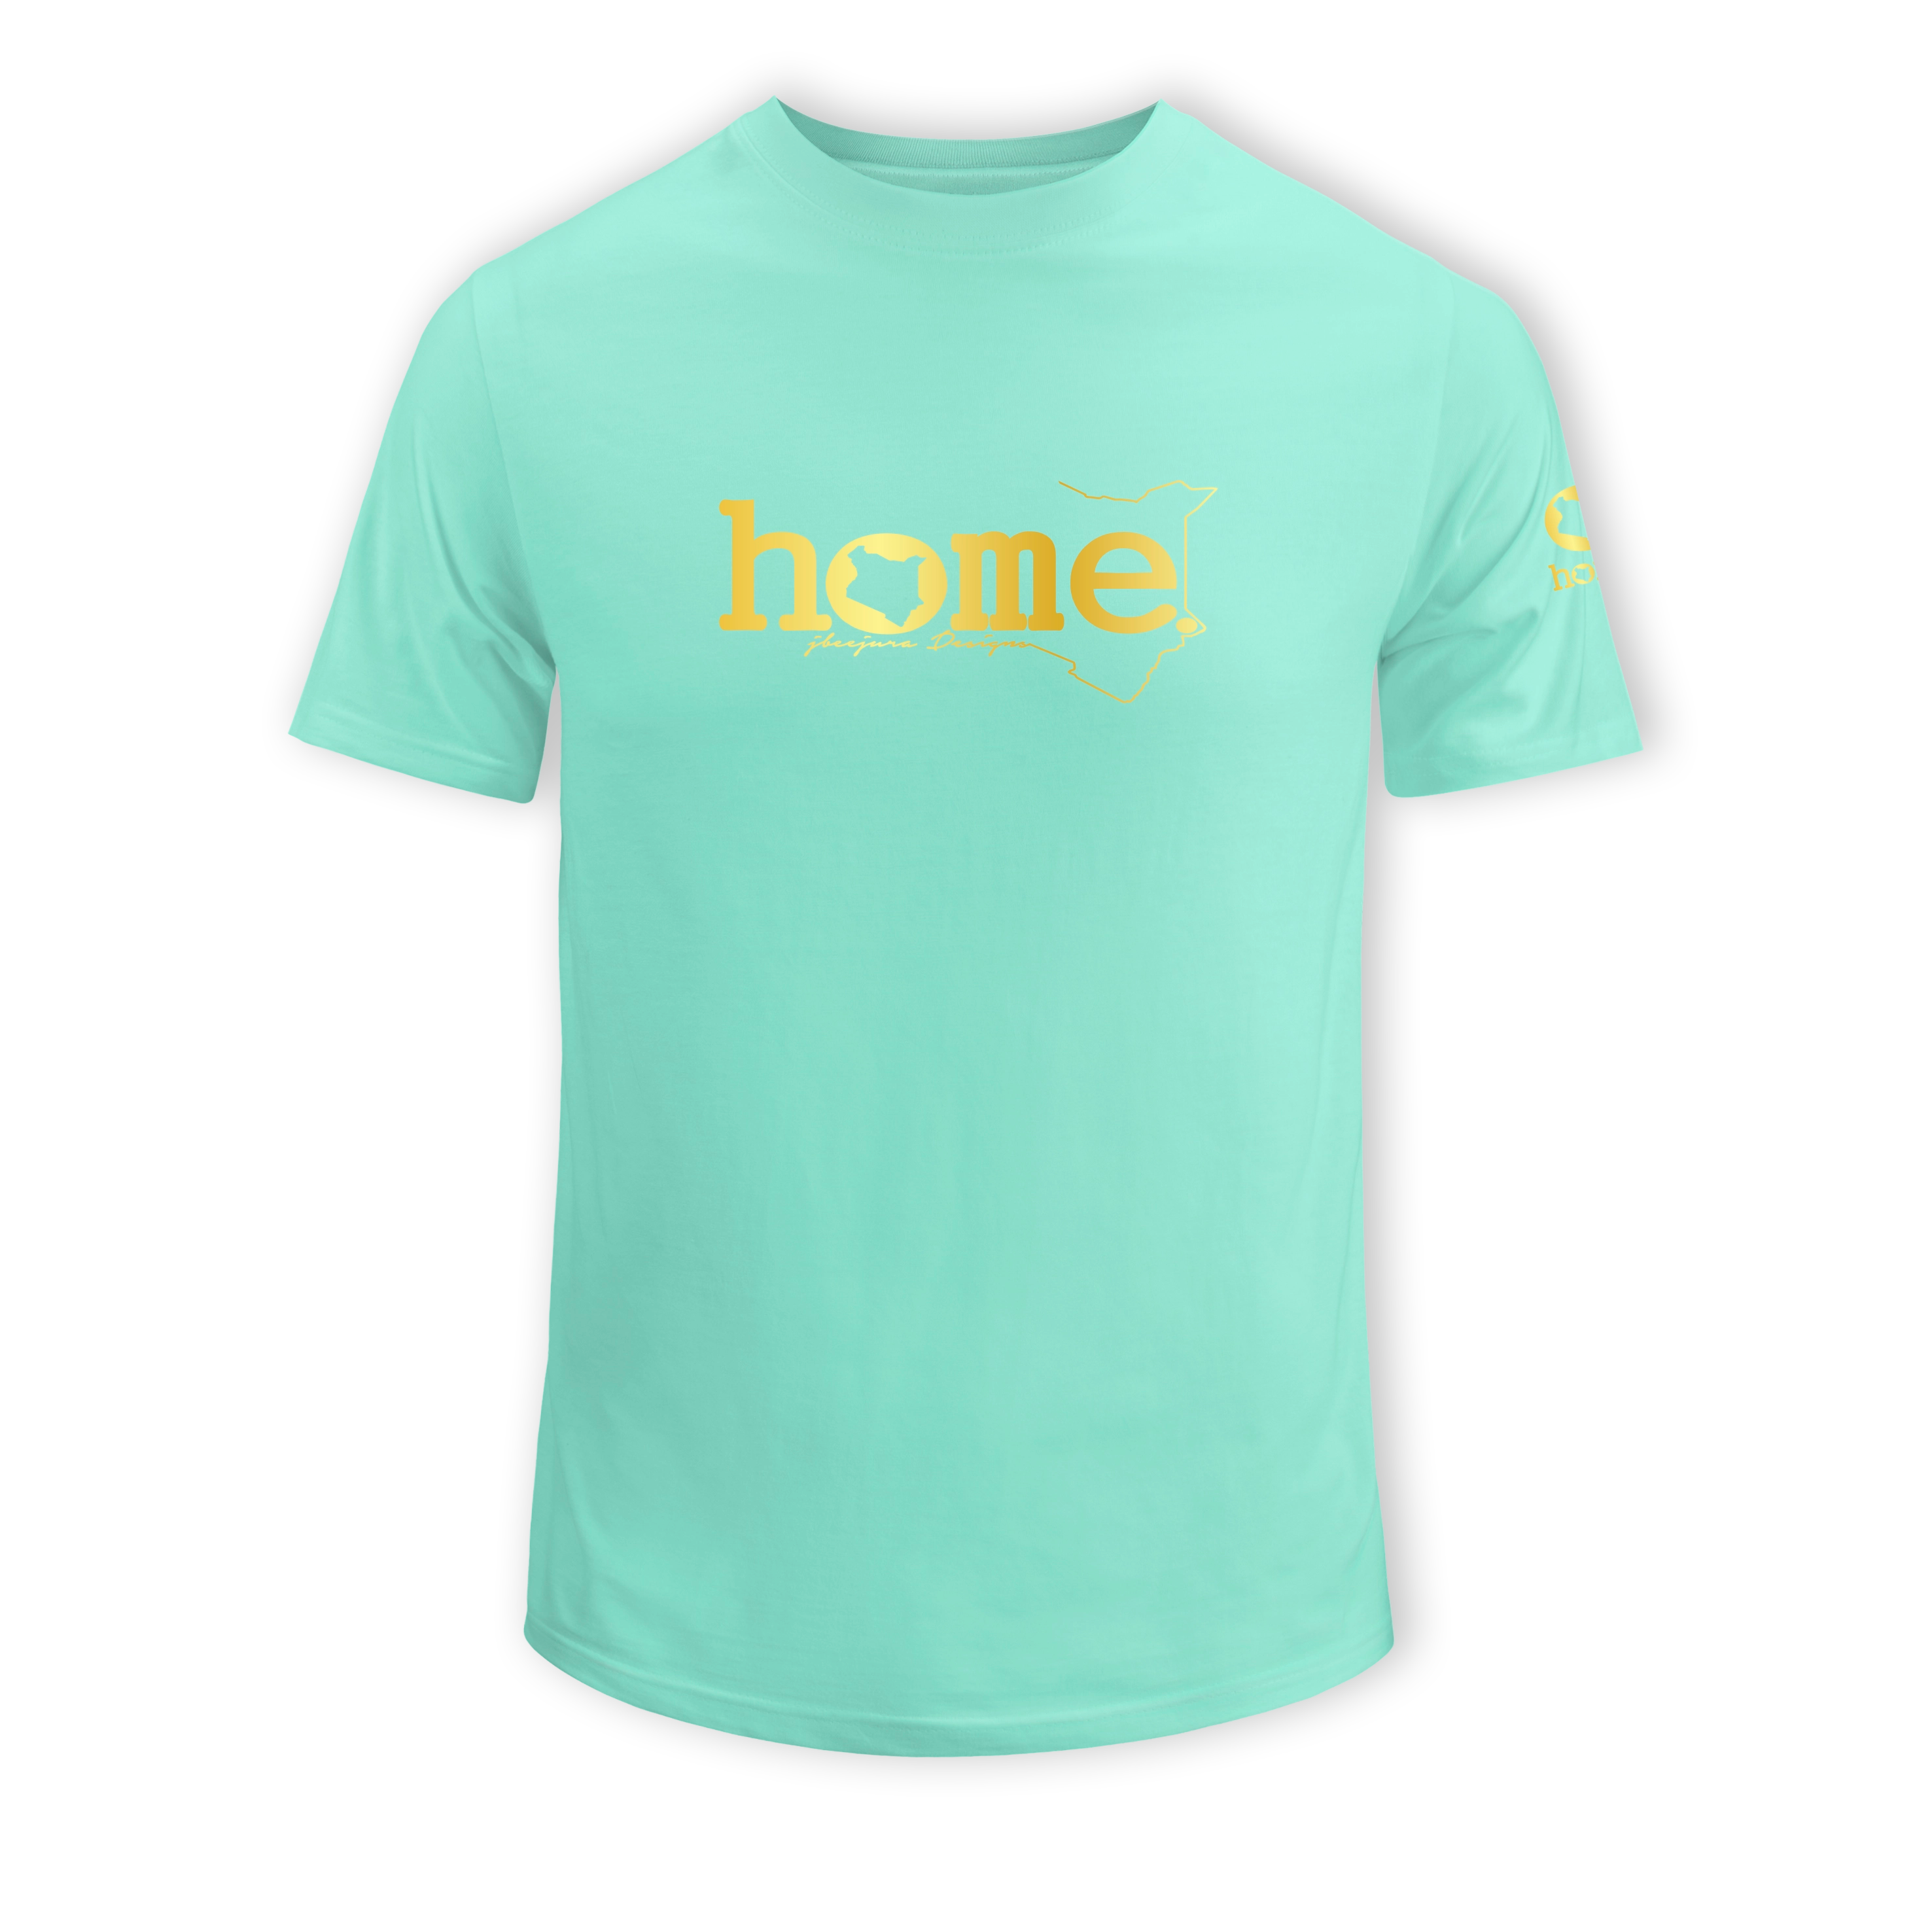 home_254 SHORT-SLEEVED TURQUOISE GREEN T-SHIRT WITH A GOLD CLASSIC WORDS PRINT – COTTON PLUS FABRIC